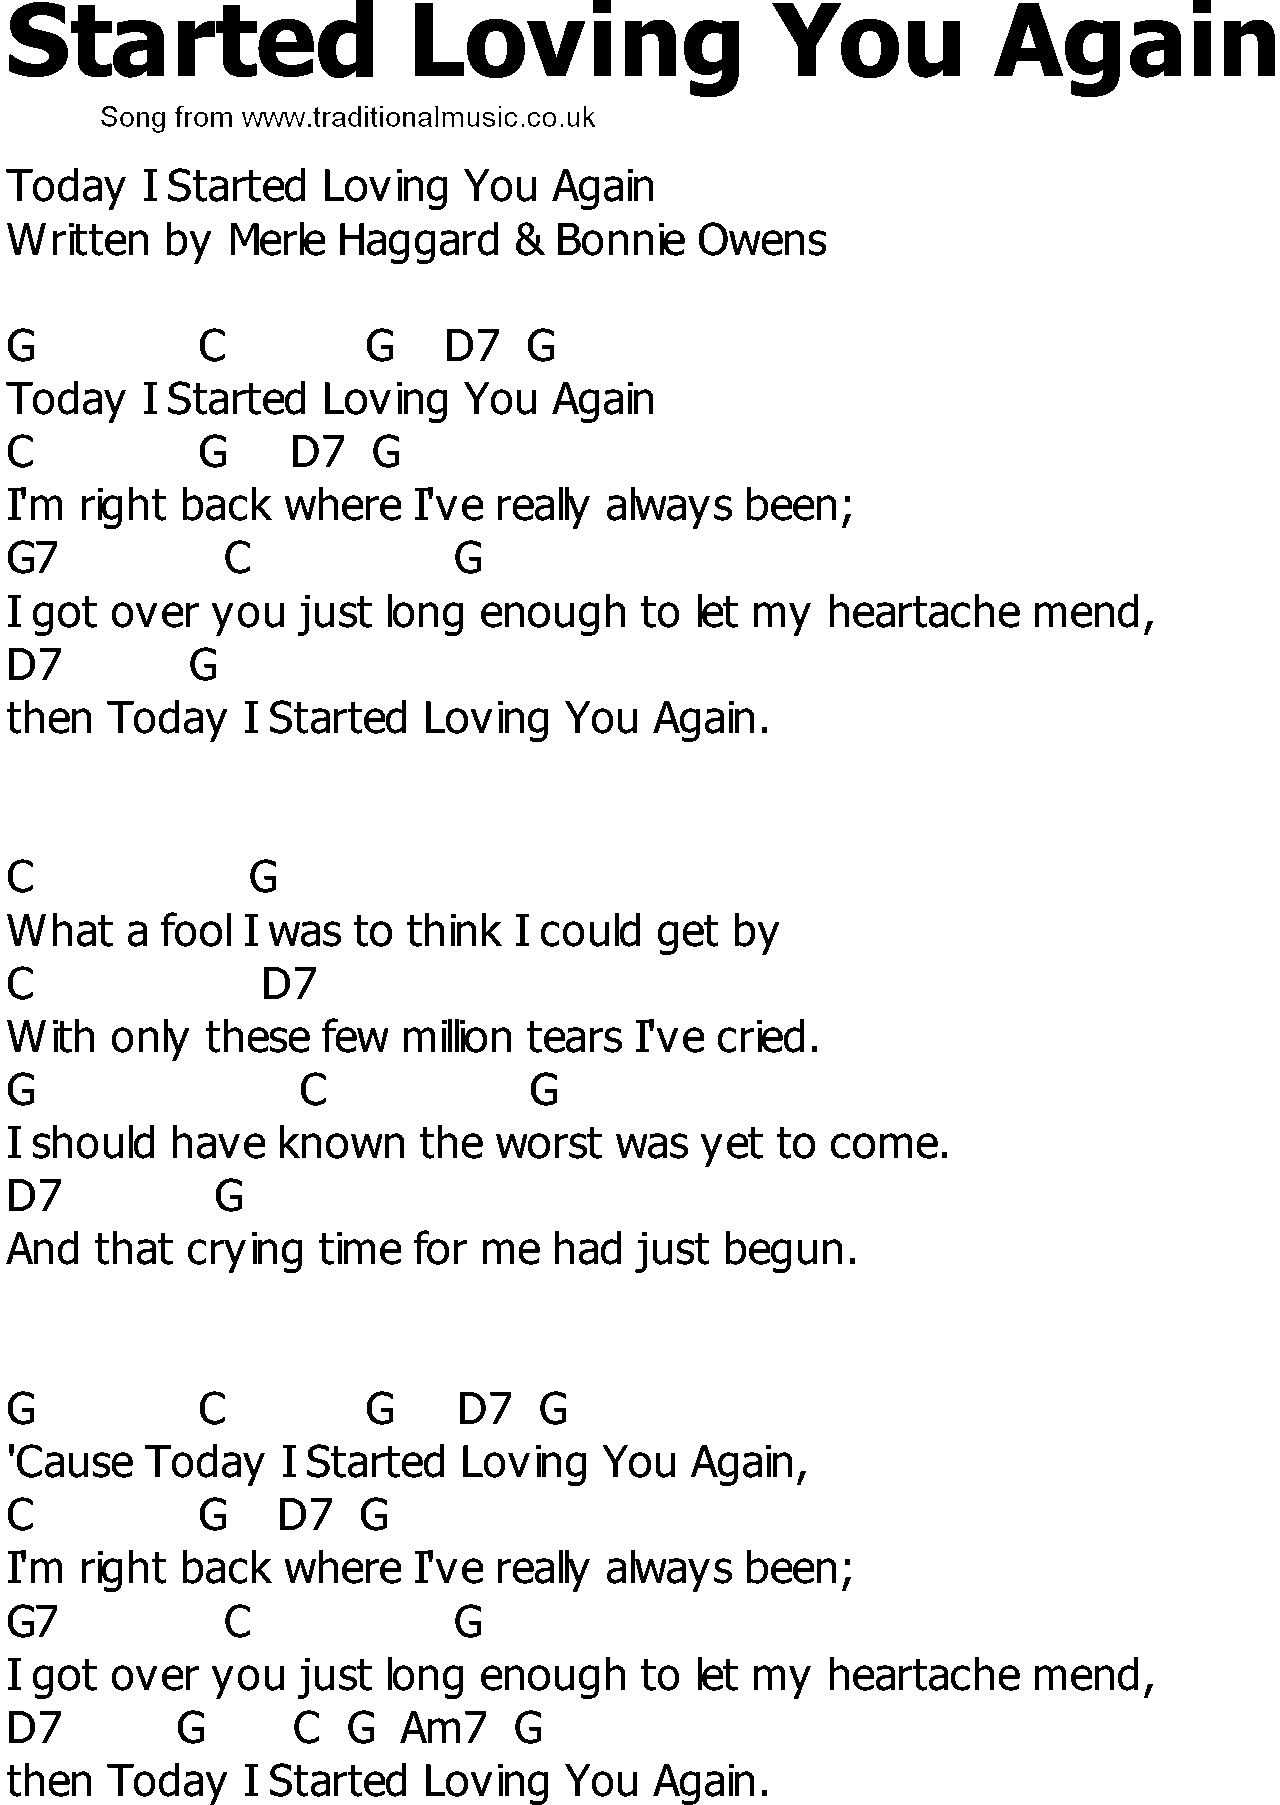 Old Country song lyrics with chords - Started Loving You Again